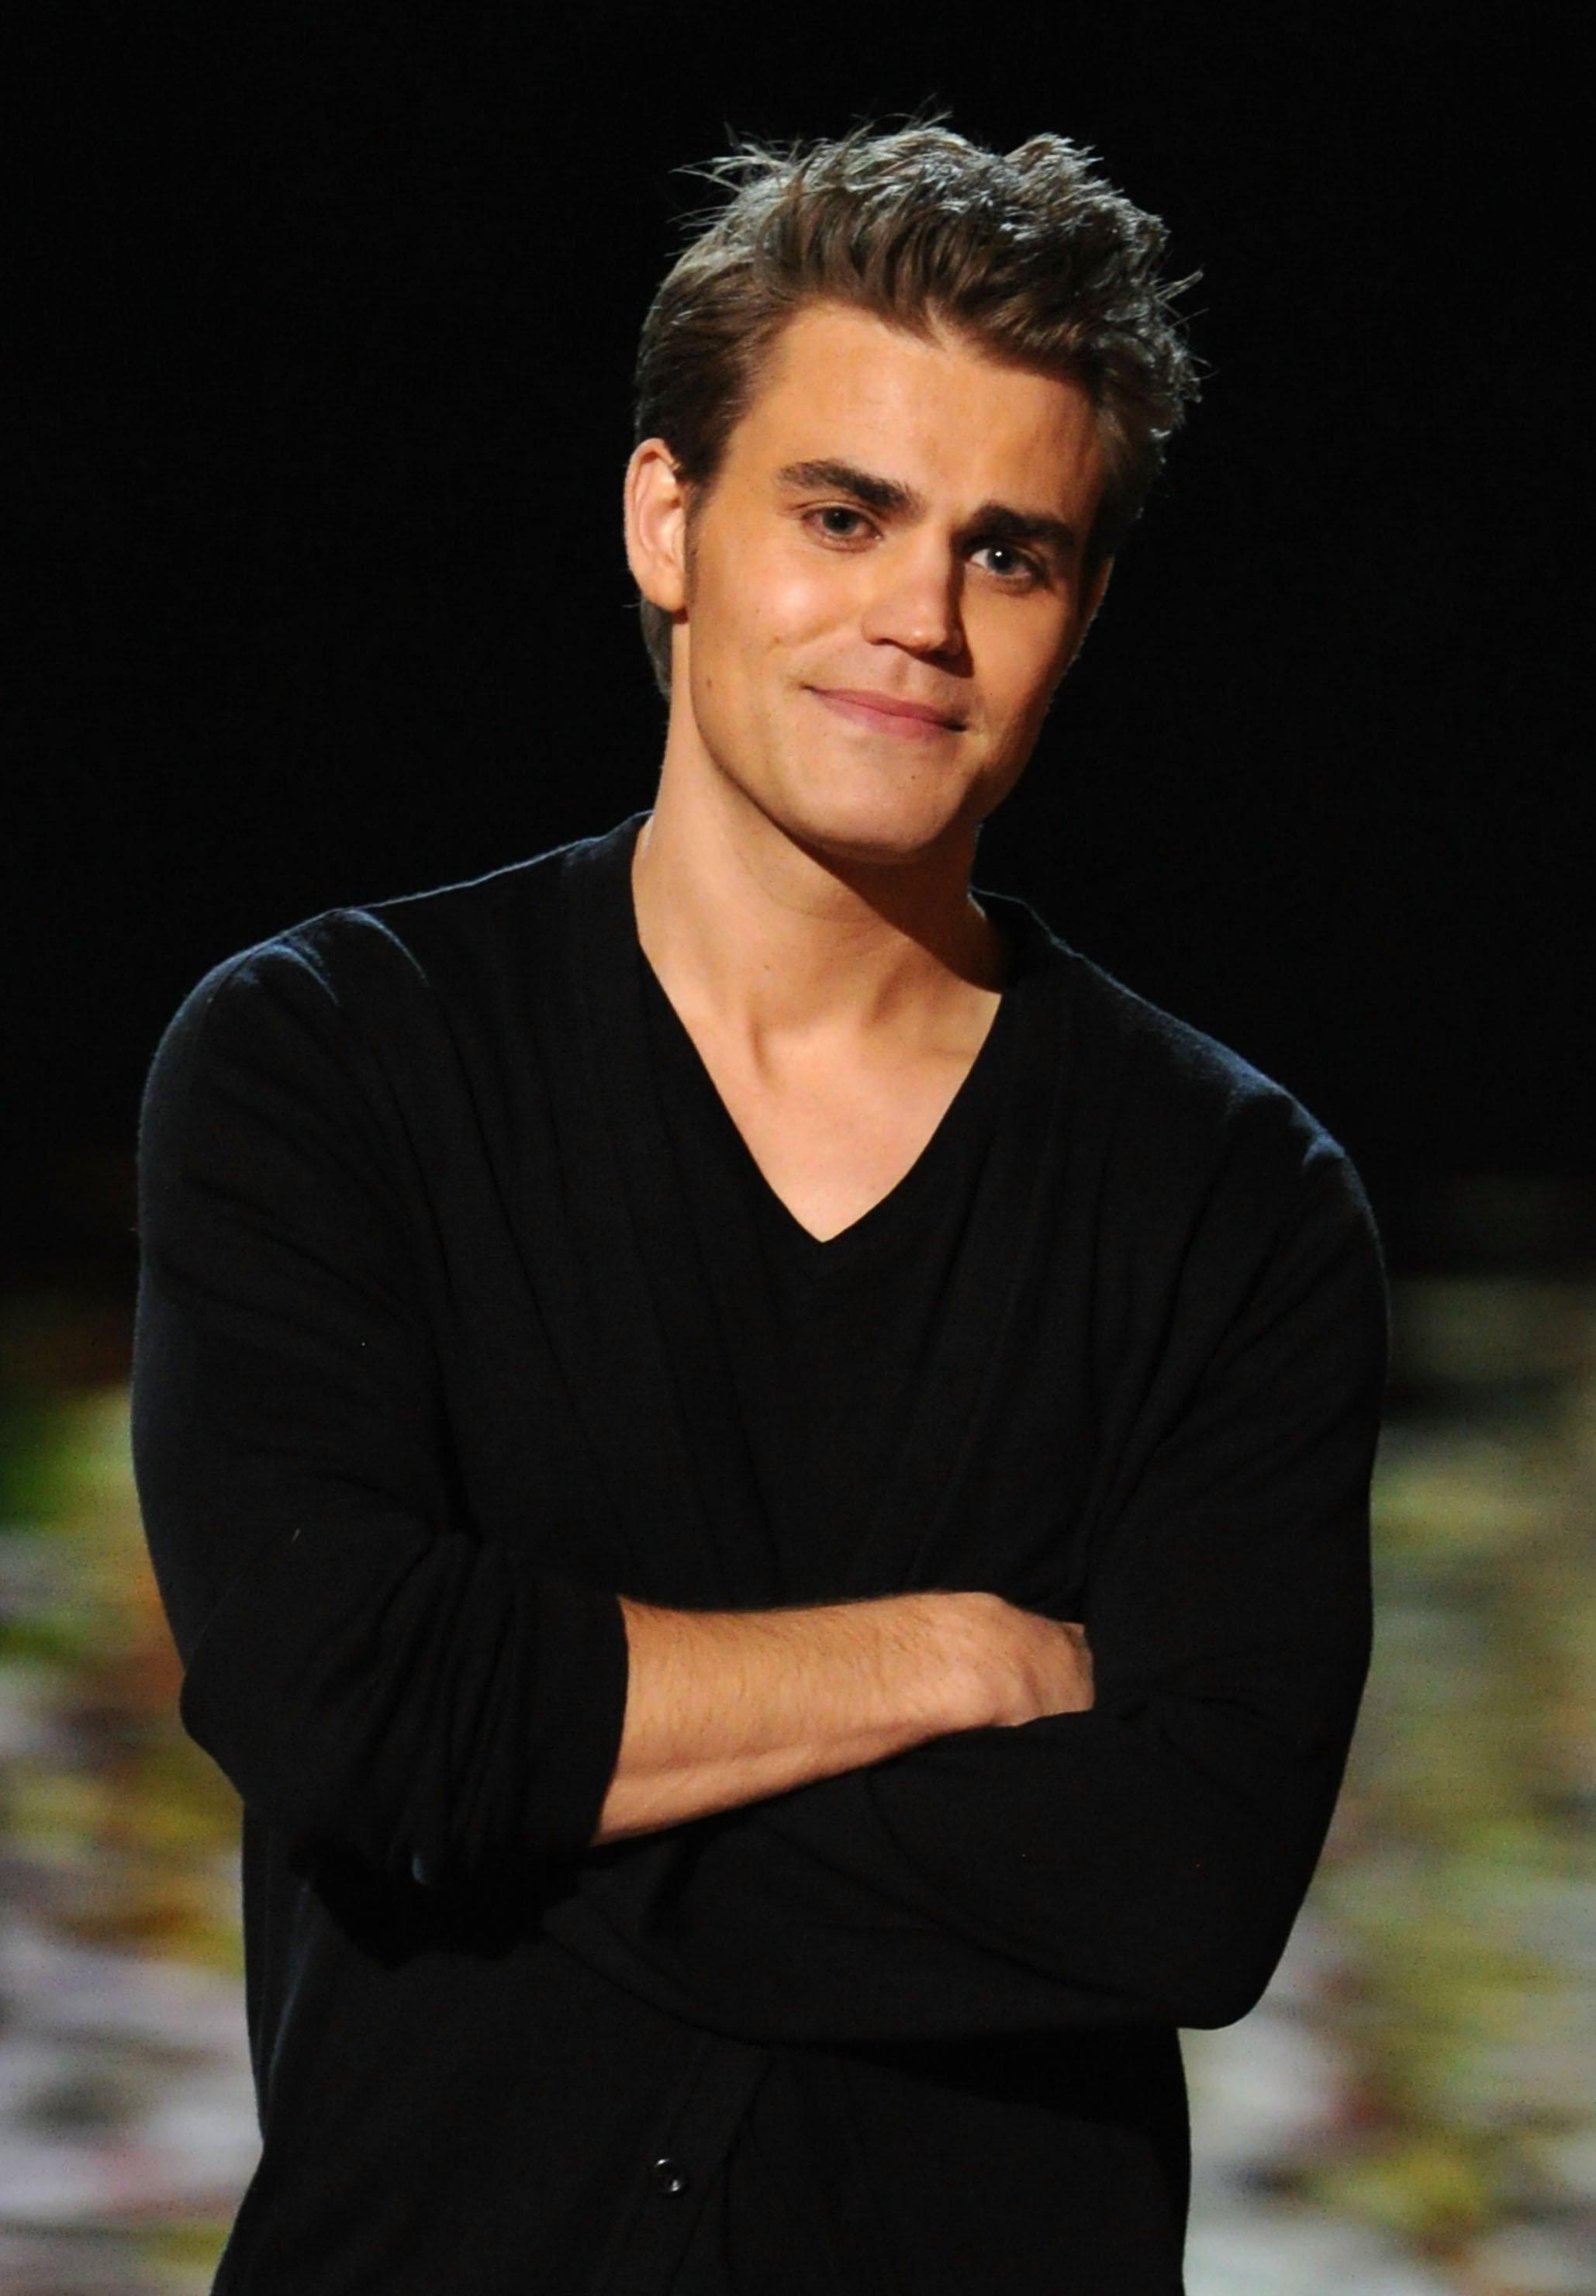 Paul Wesley photo 133 of 291 pics, wallpaper - photo #452311 - ThePlace2